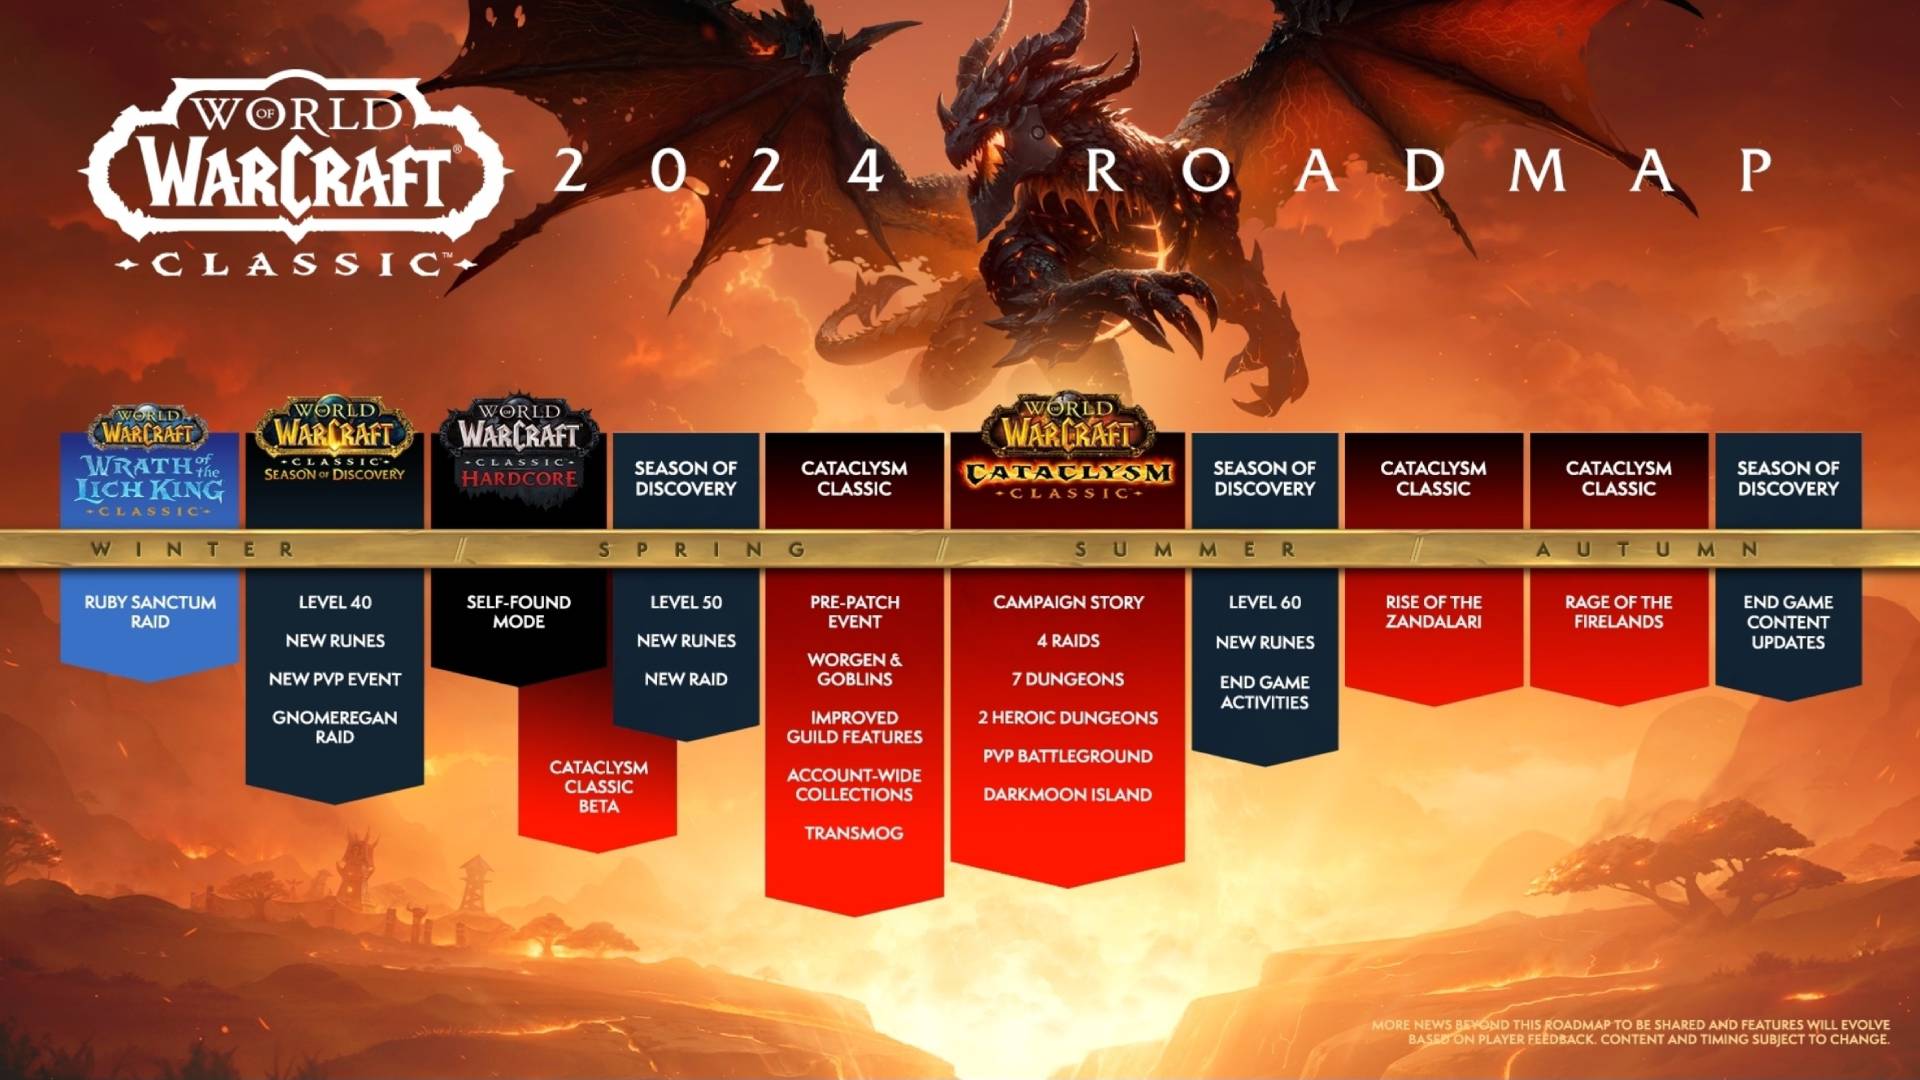 A roadmap from Blizzard entertainment showing the 2024 timeline for WoW Classic, including Cataclysm